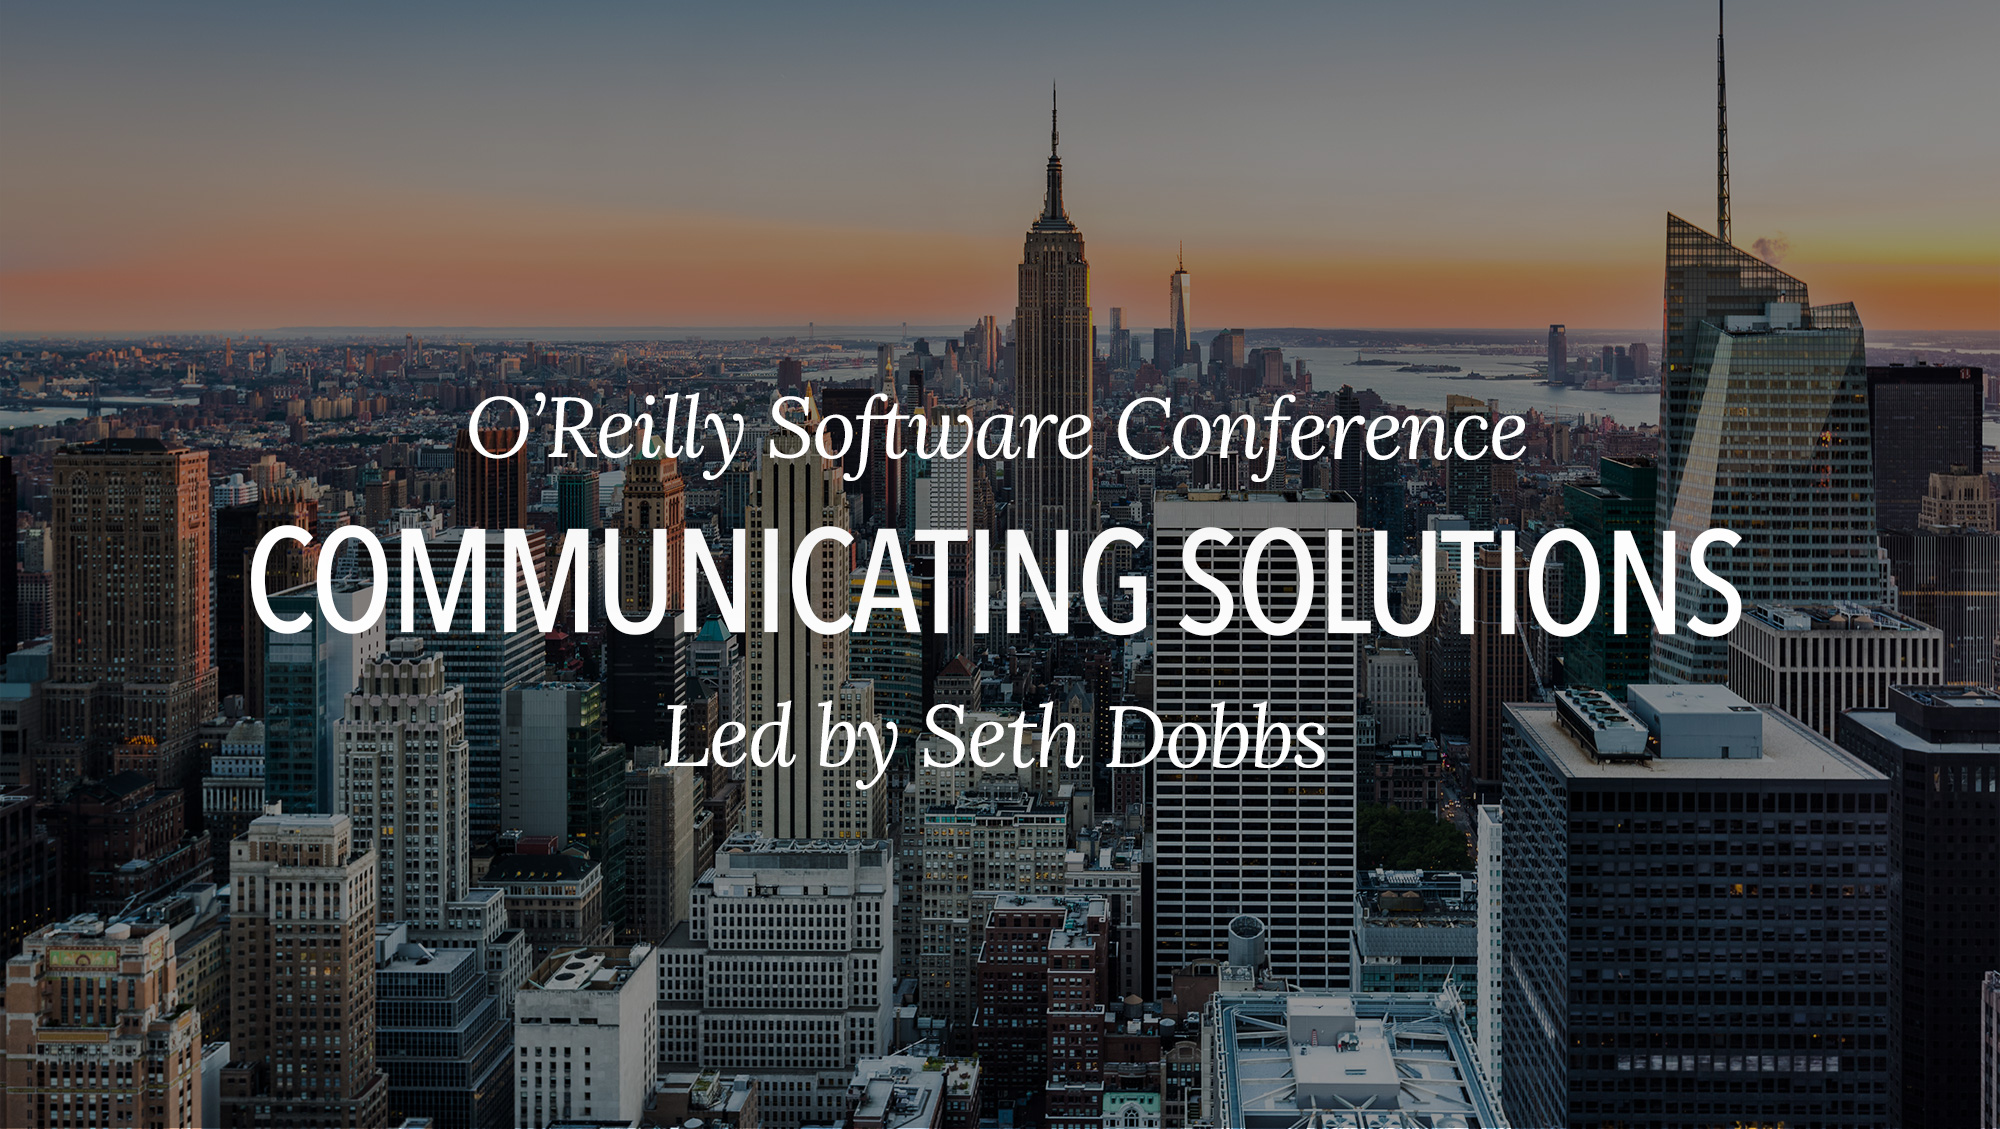 Bounteous’s Seth Dobbs to Address Shaping and Communicating Architectural Solutions at O’Reilly Software Conference